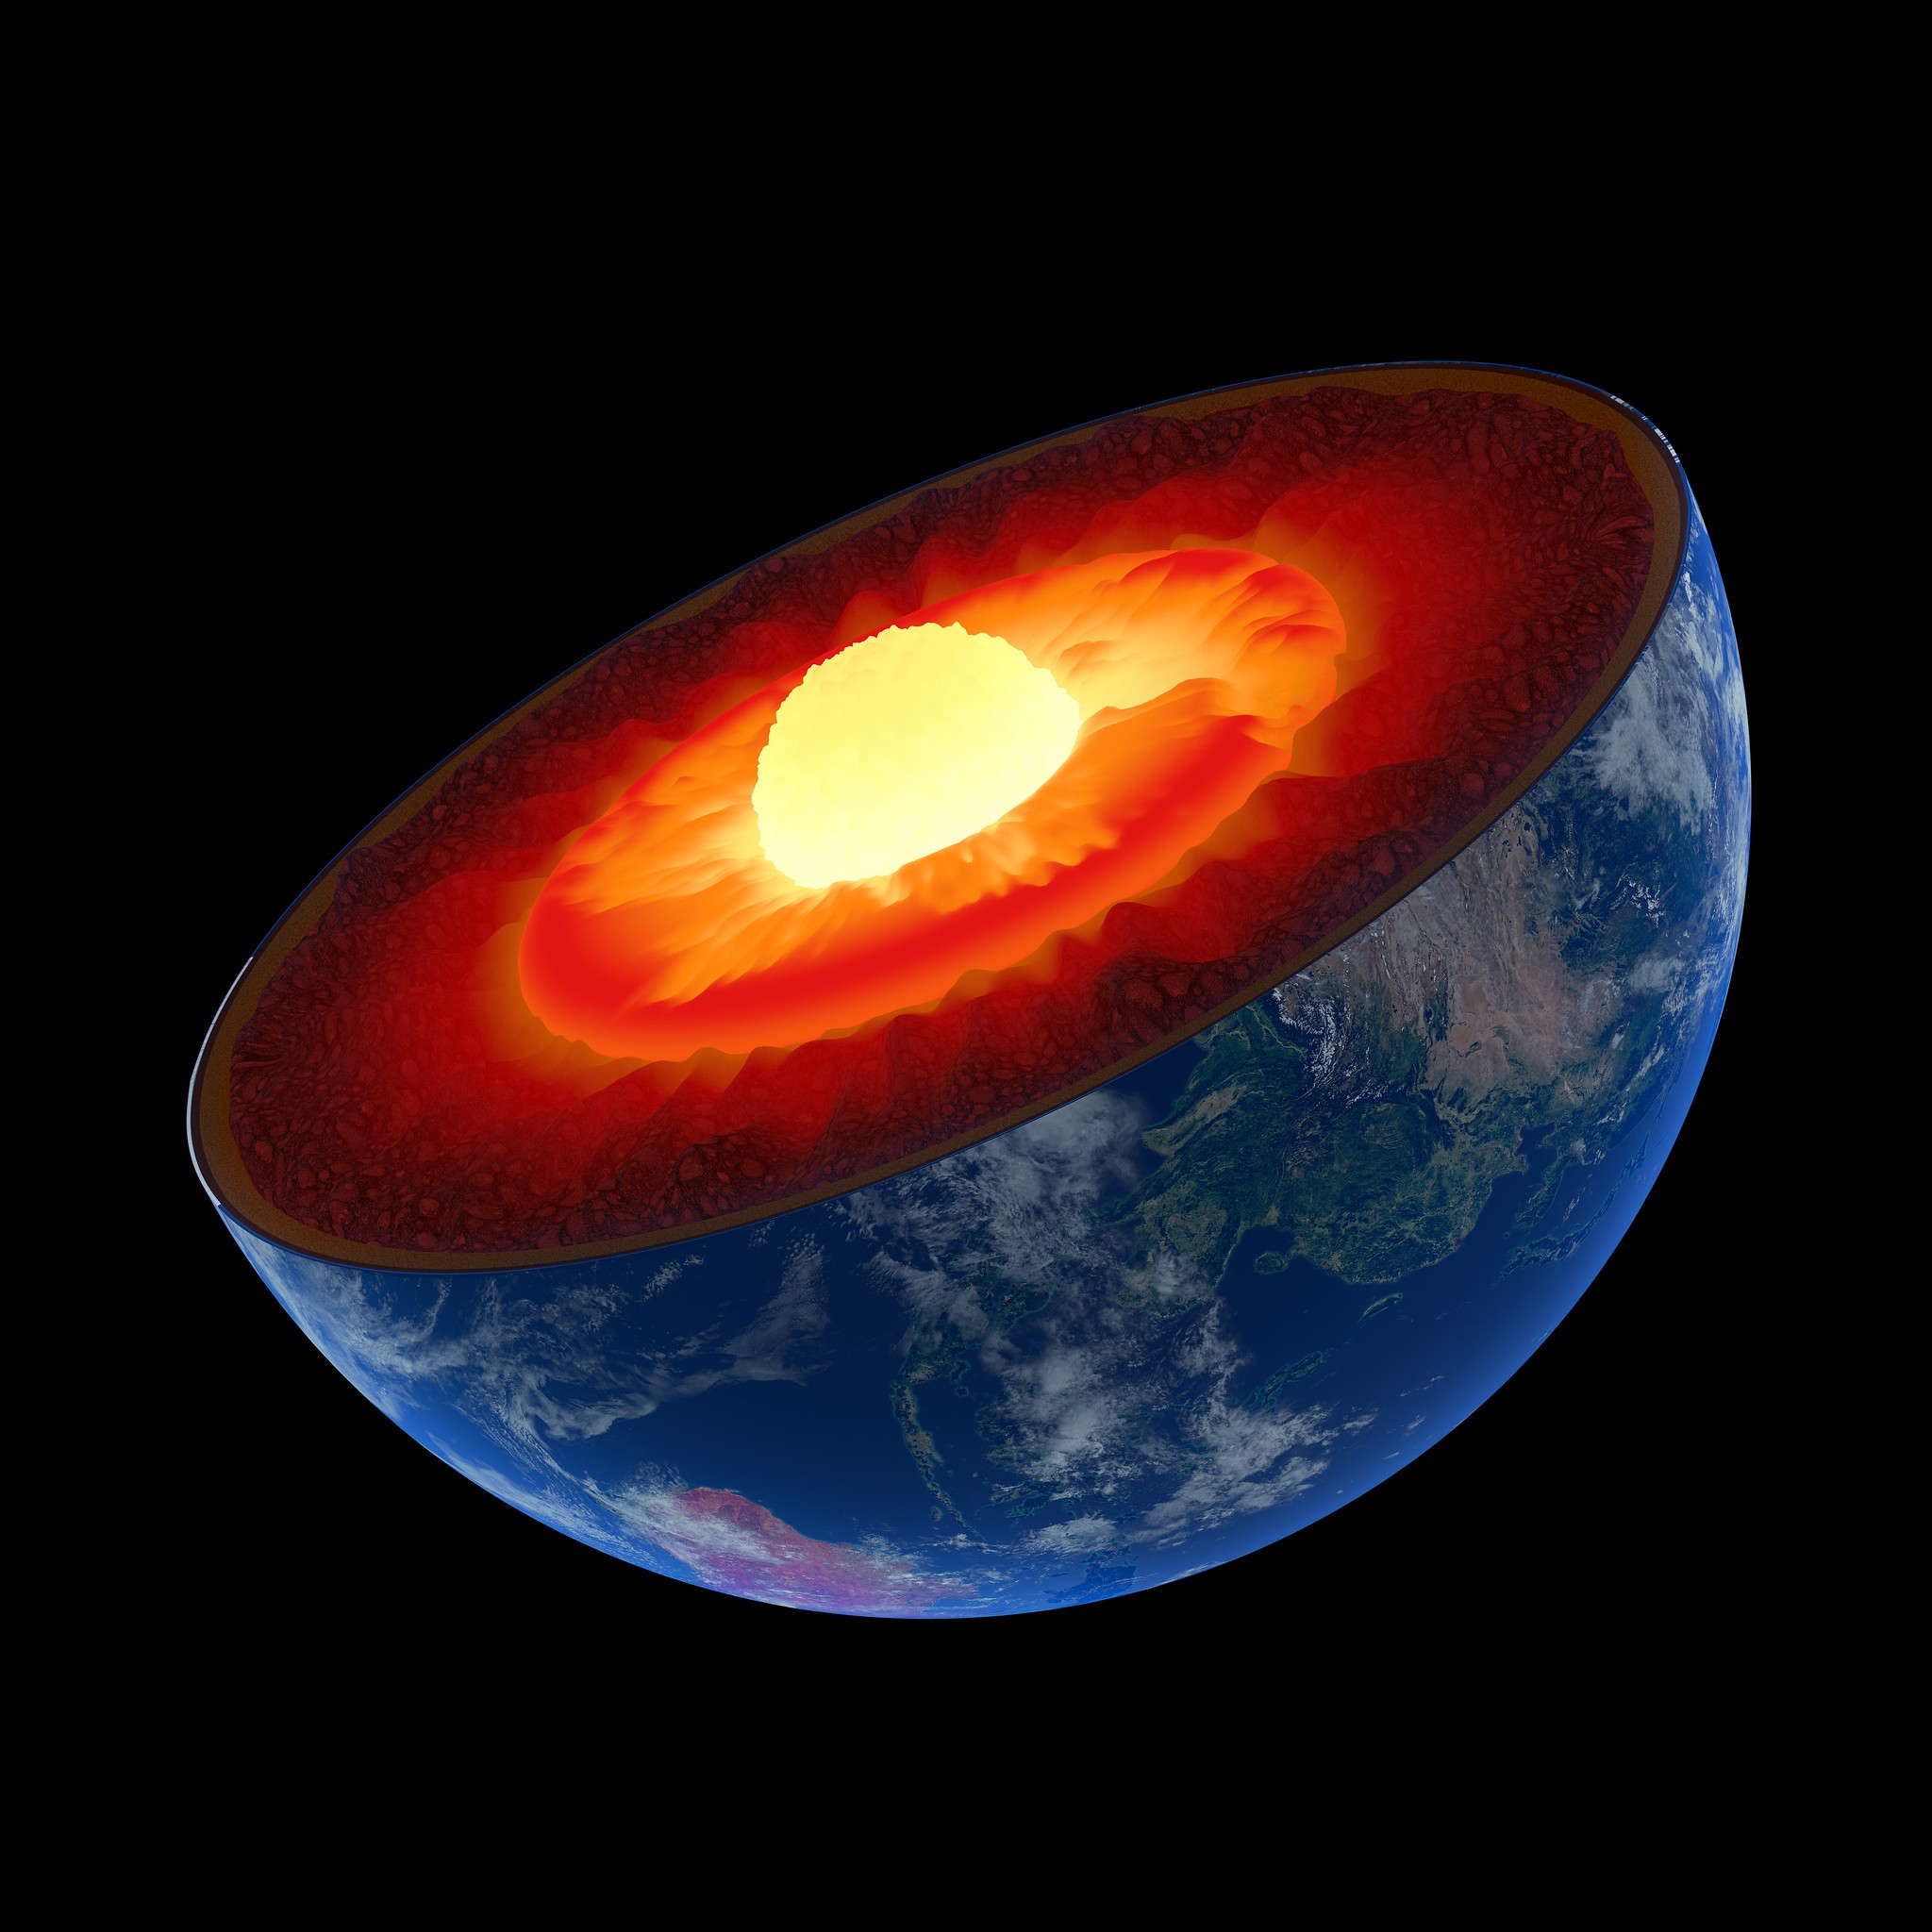 Earth's Core Has Stopped and May Be Reversing Direction, Study Says